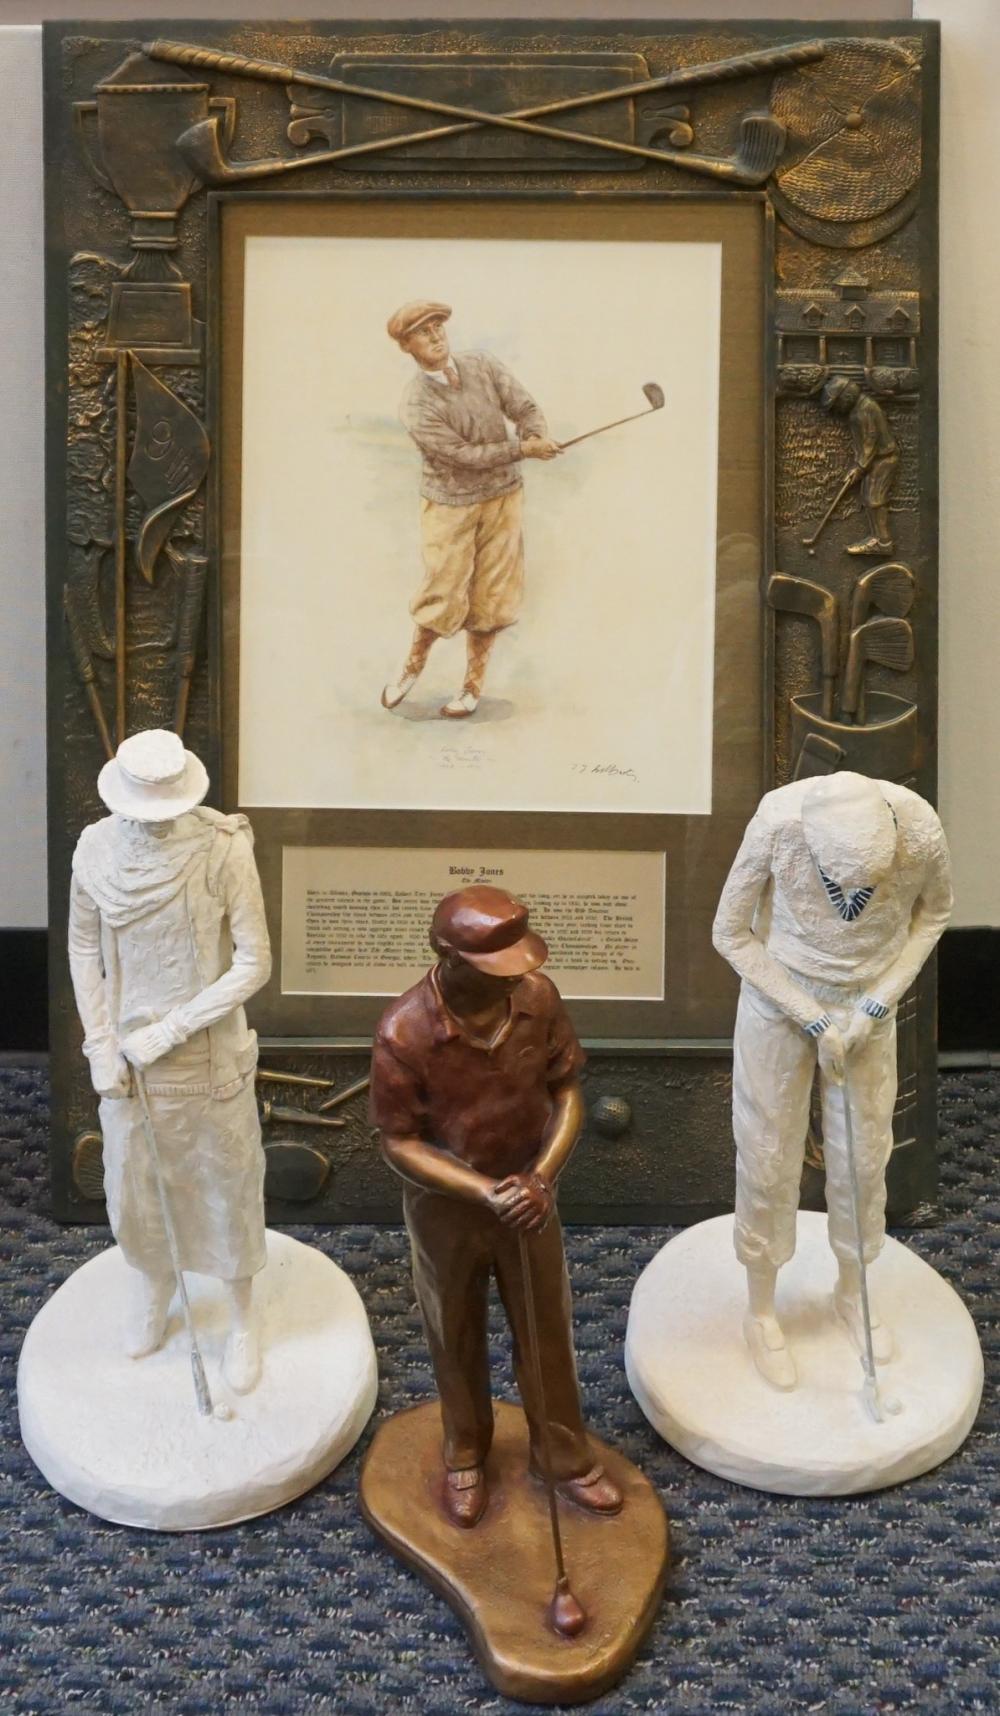 THREE COMPOSITE GOLF FIGURES WITH